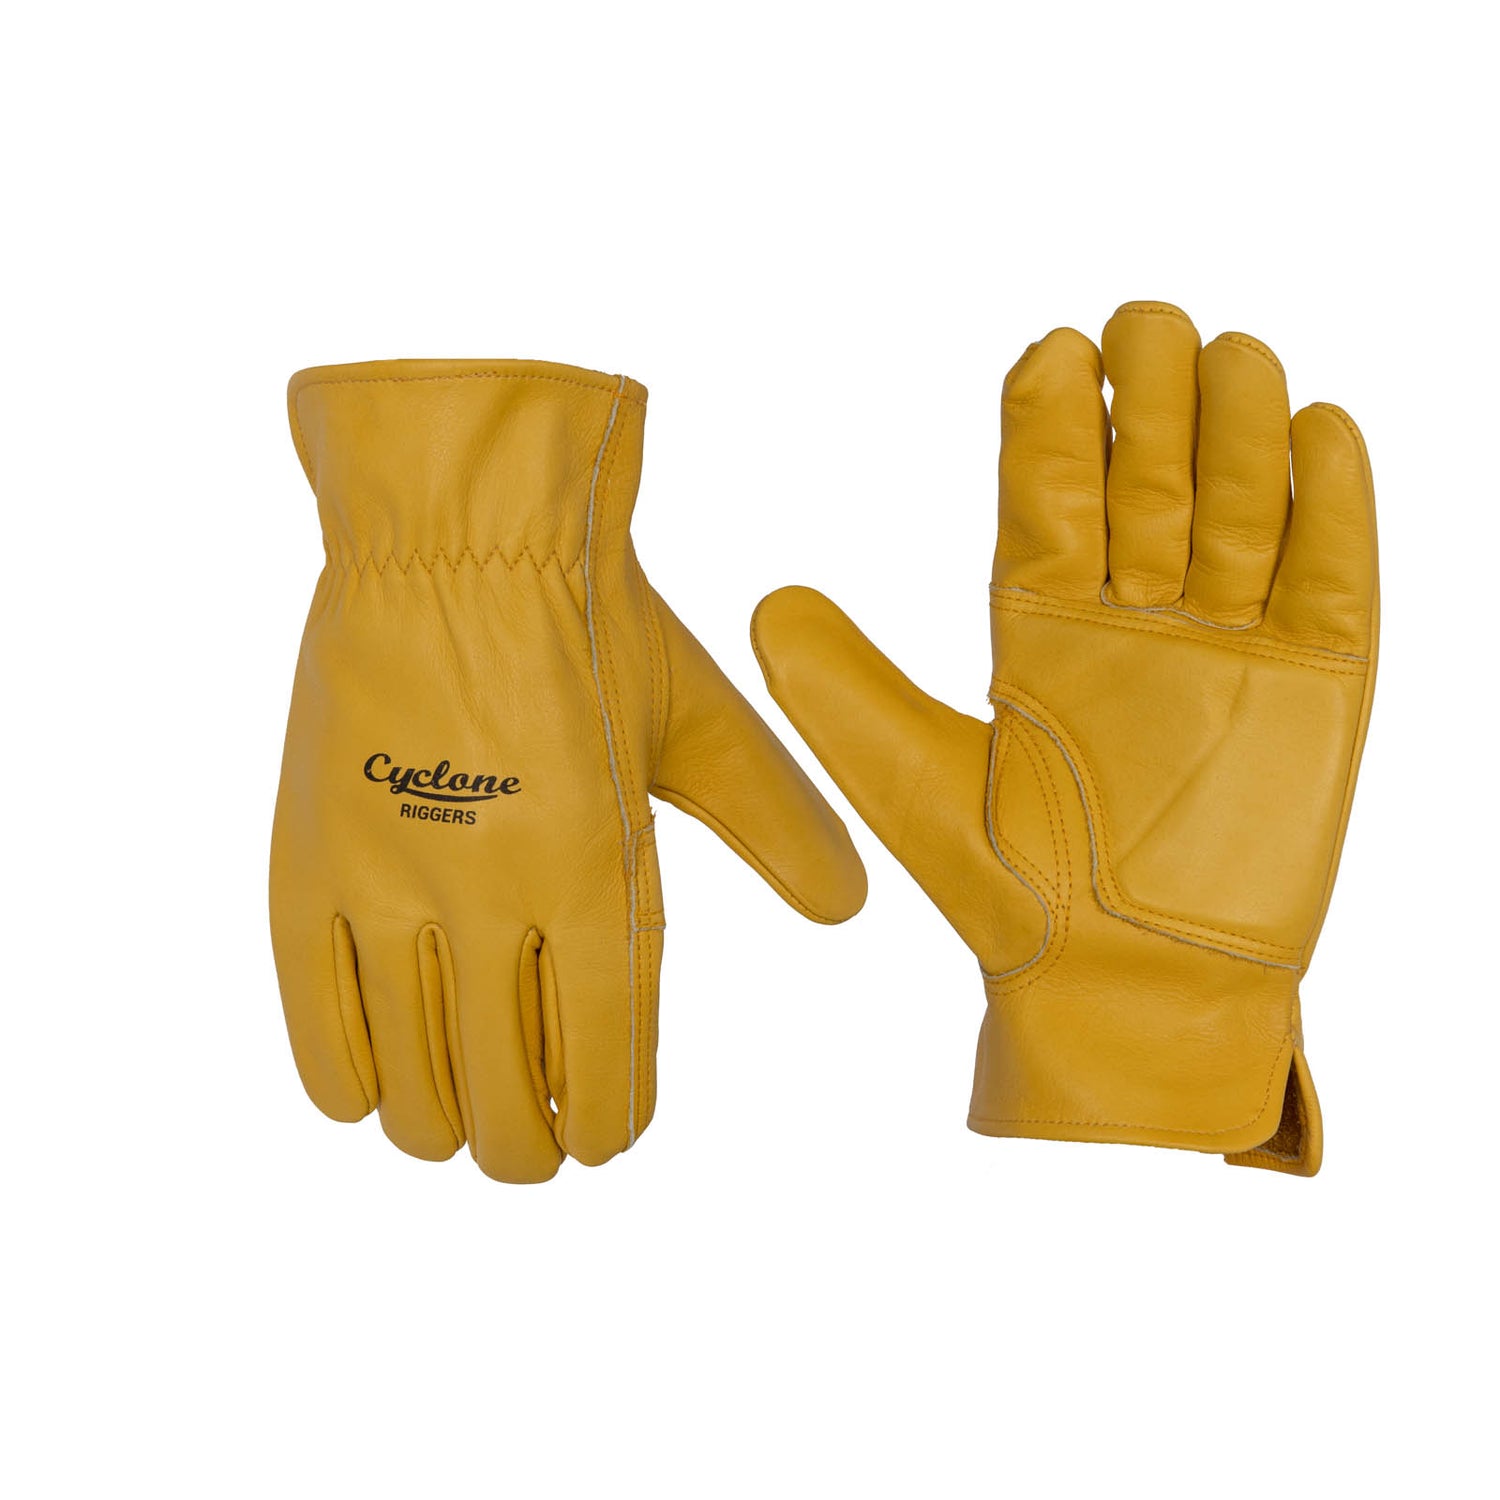 Top-Grain Leather Riggers Gloves